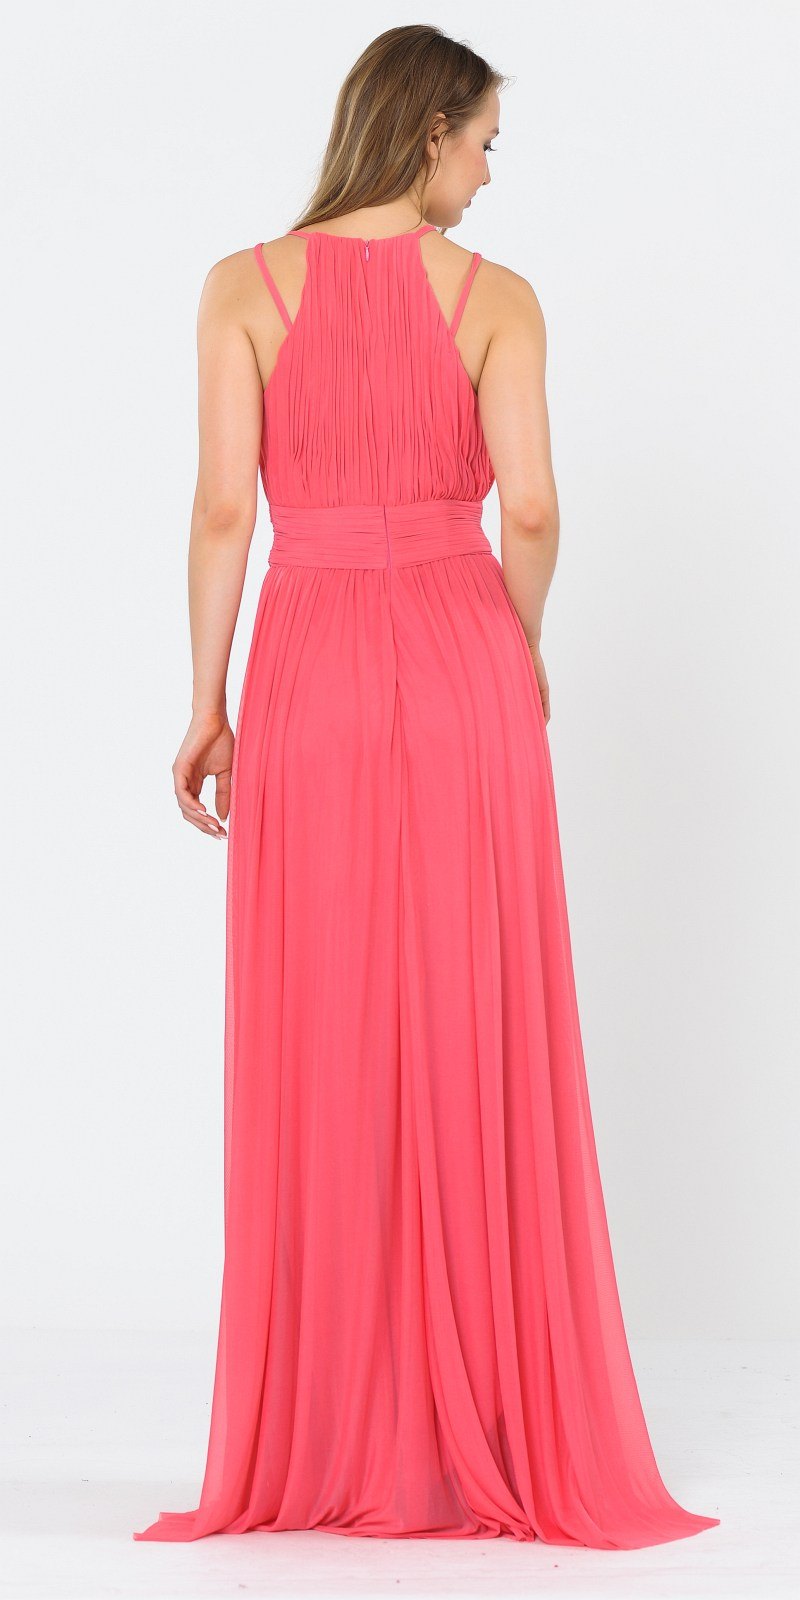 Poly USA 8396 Halter Ruched Bodice Long Formal Dress Coral